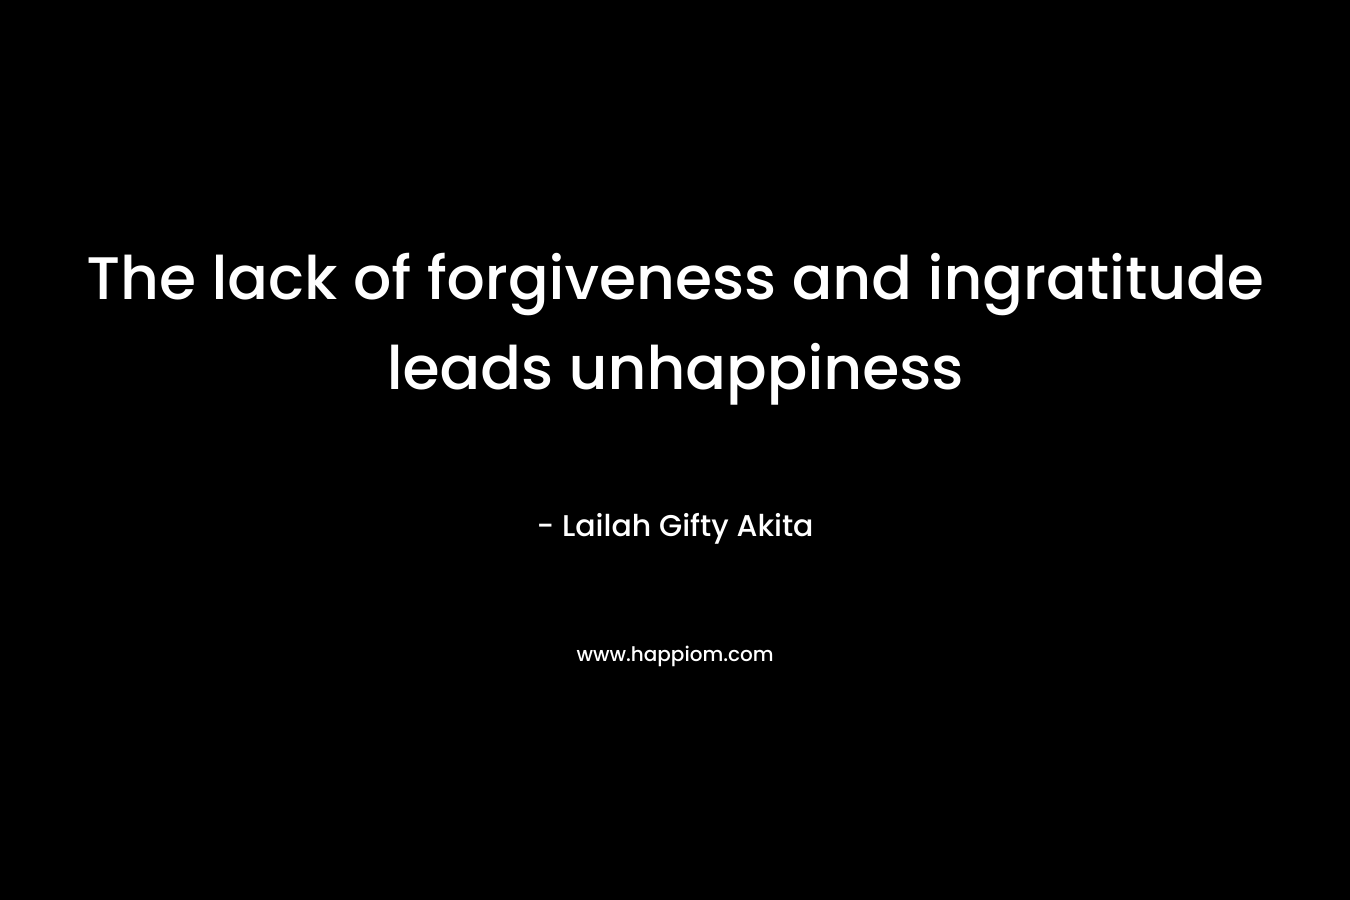 The lack of forgiveness and ingratitude leads unhappiness – Lailah Gifty Akita